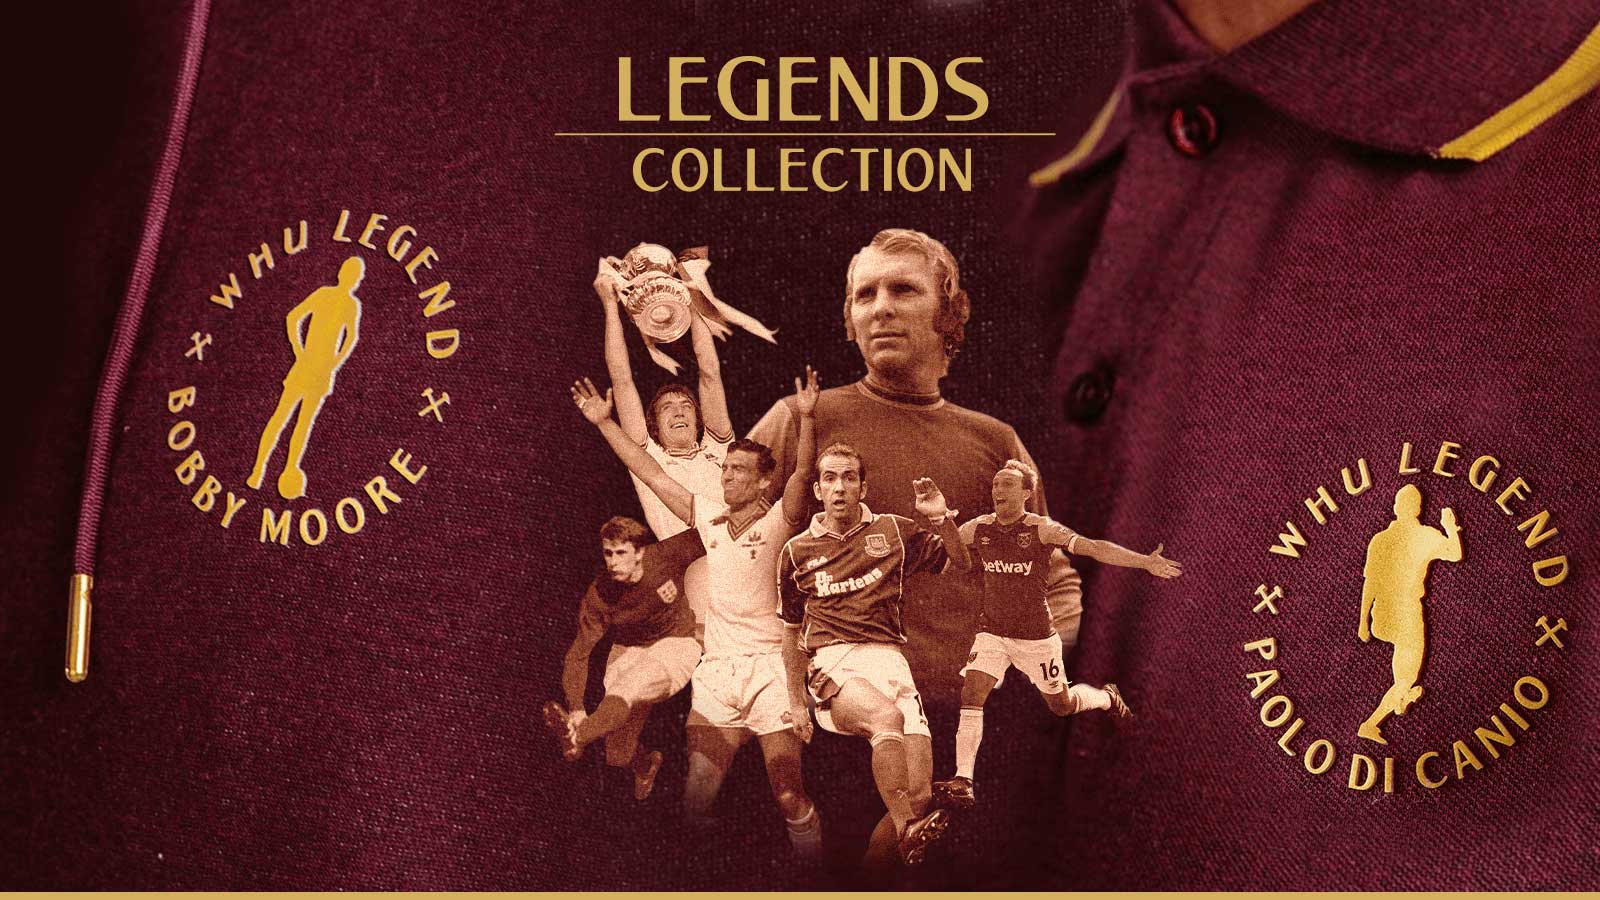 Legends collection